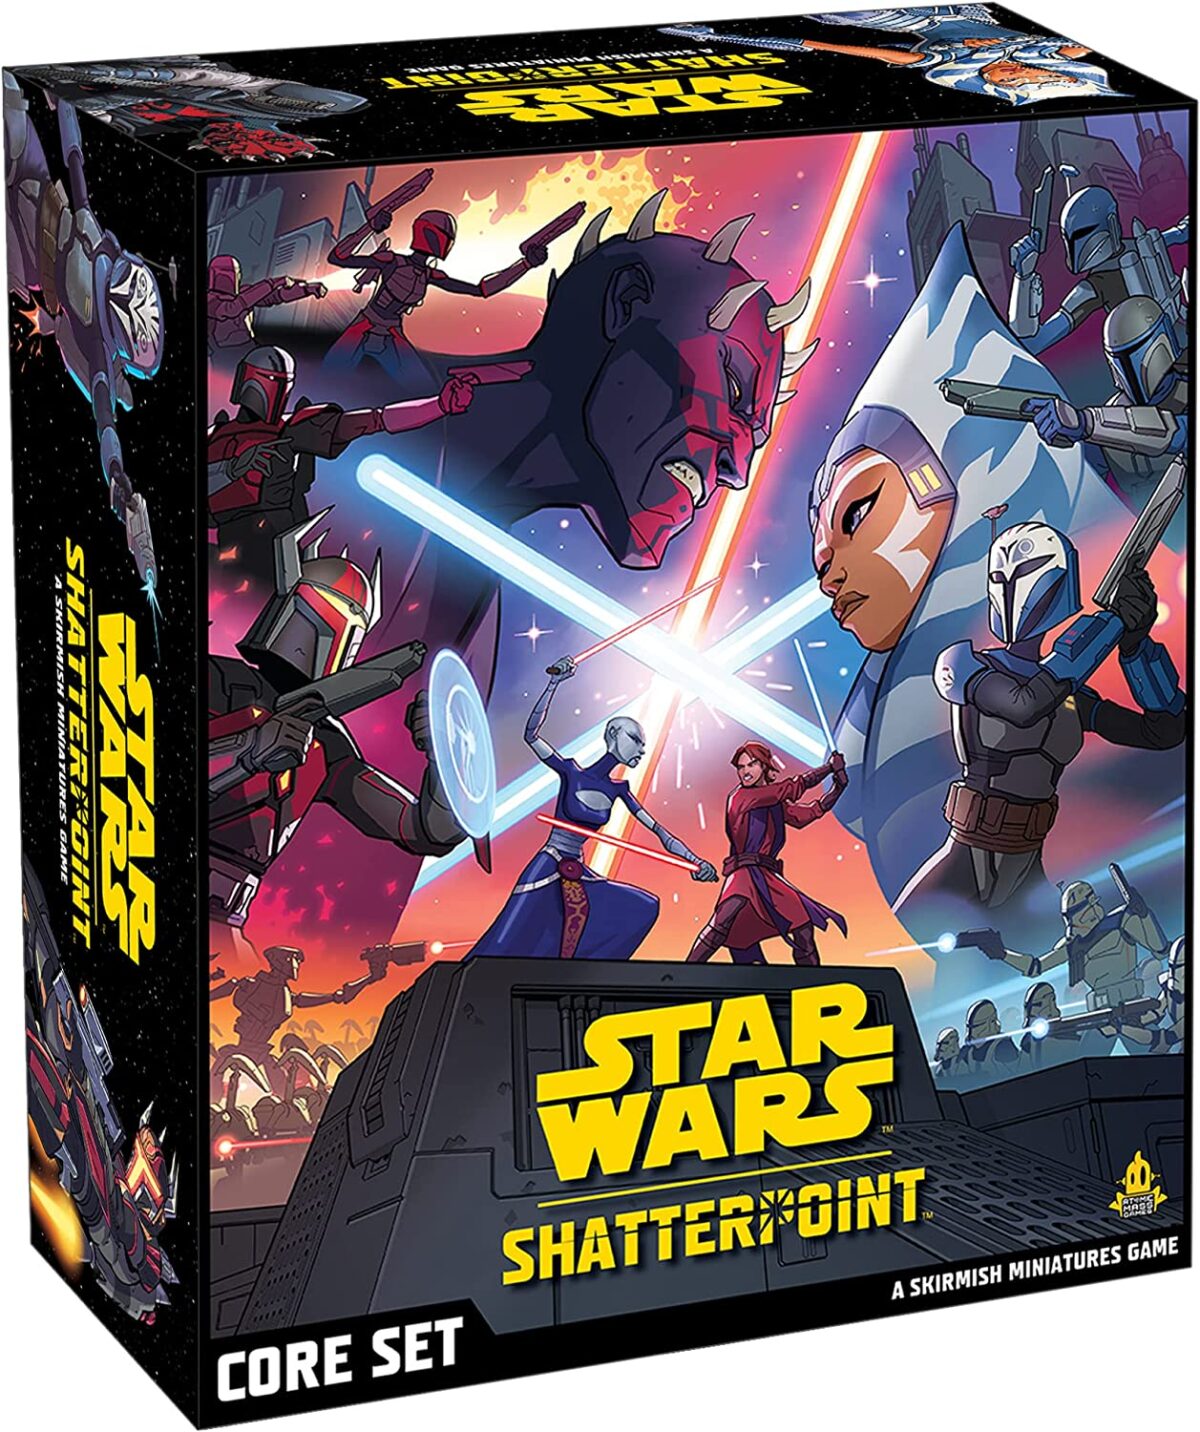 Star Wars Shatterpoint Learn to Play, March 28